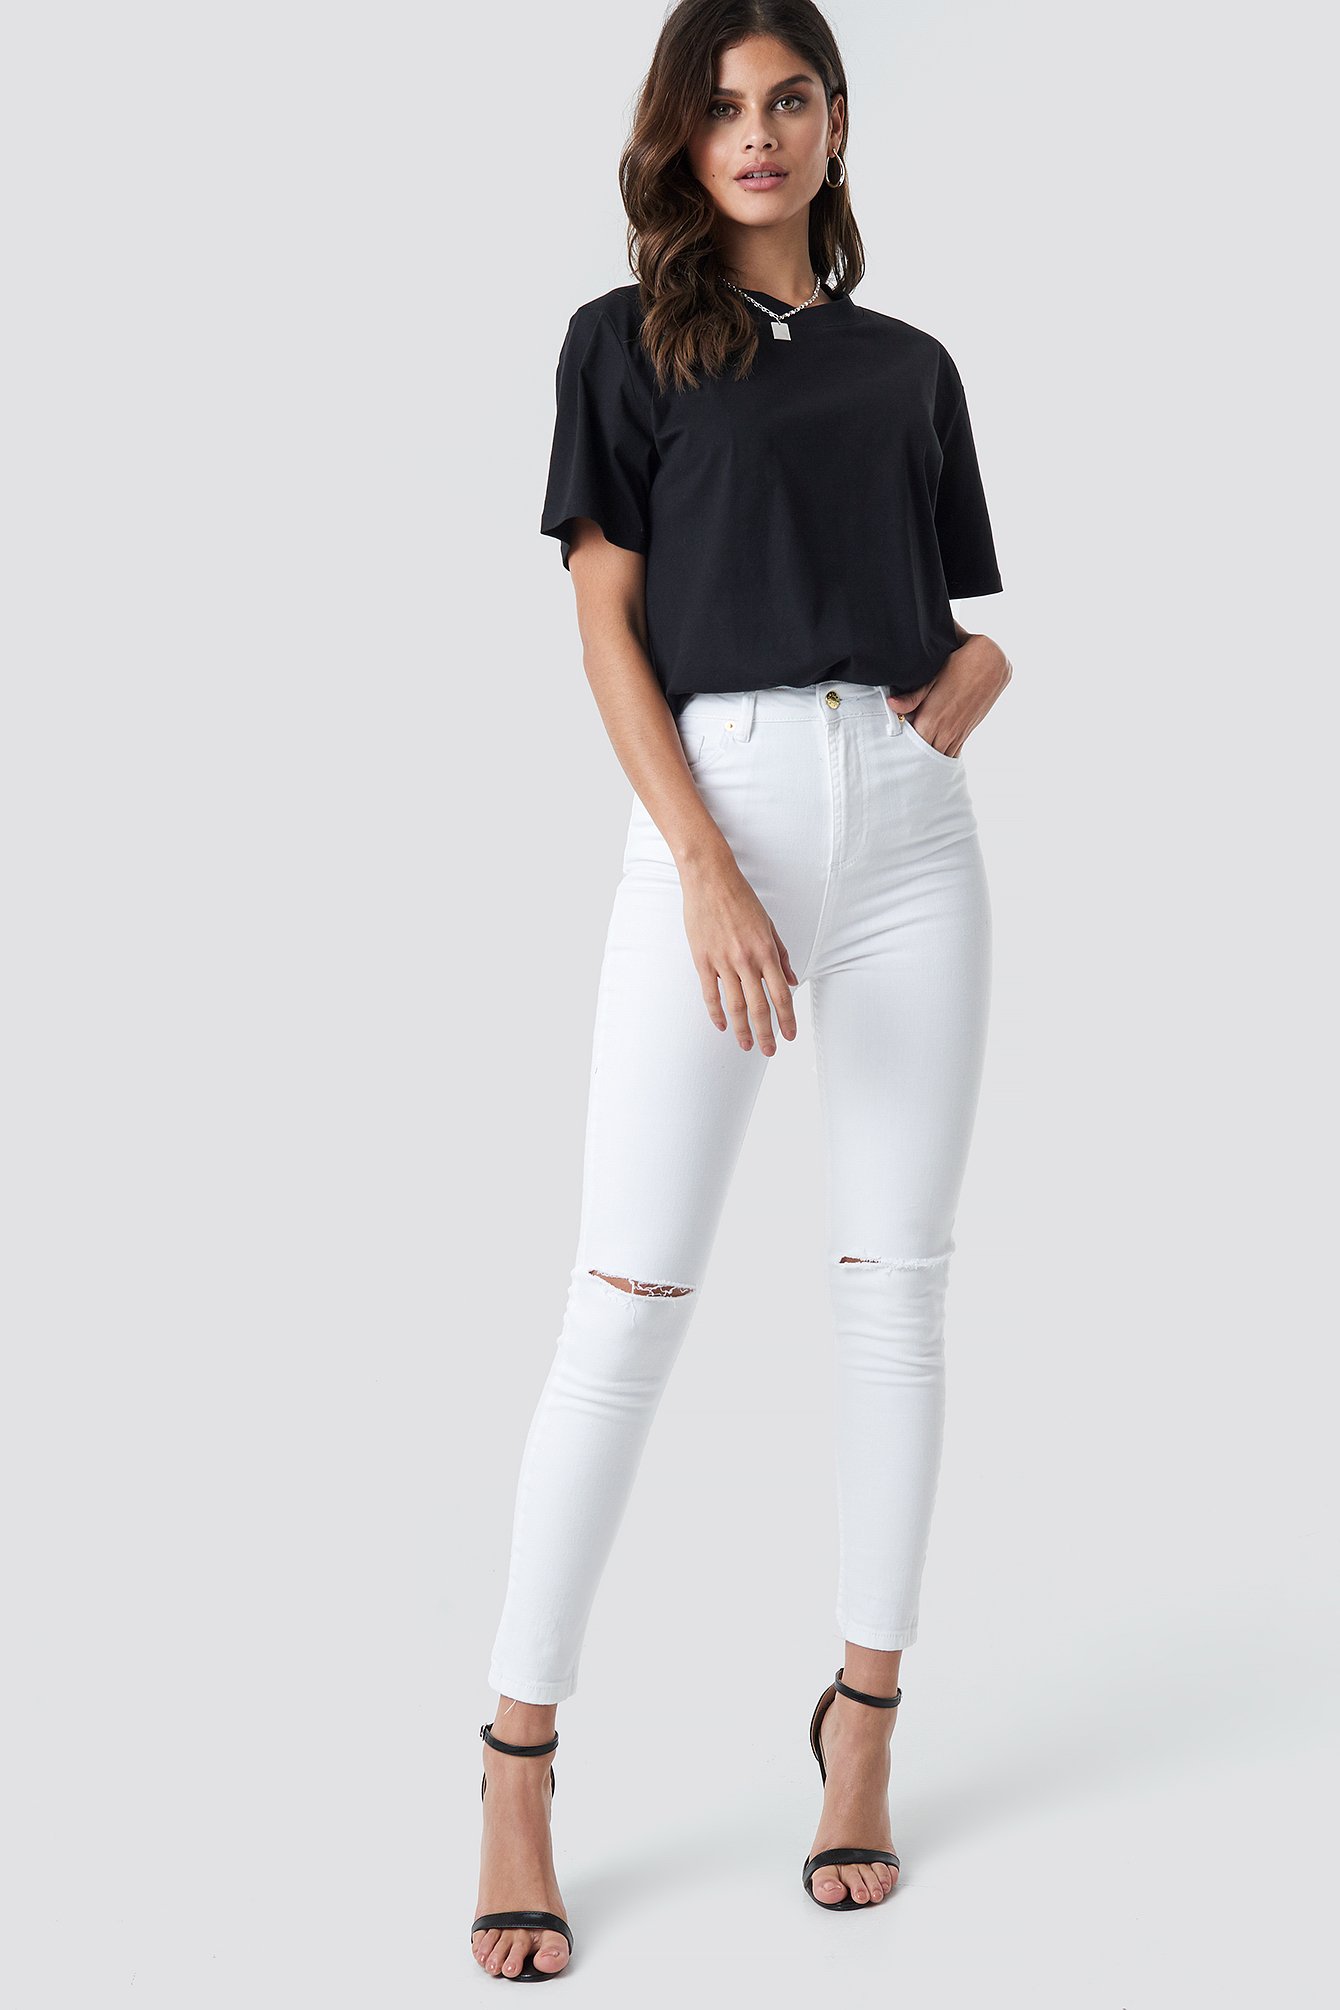 high waisted white jeans